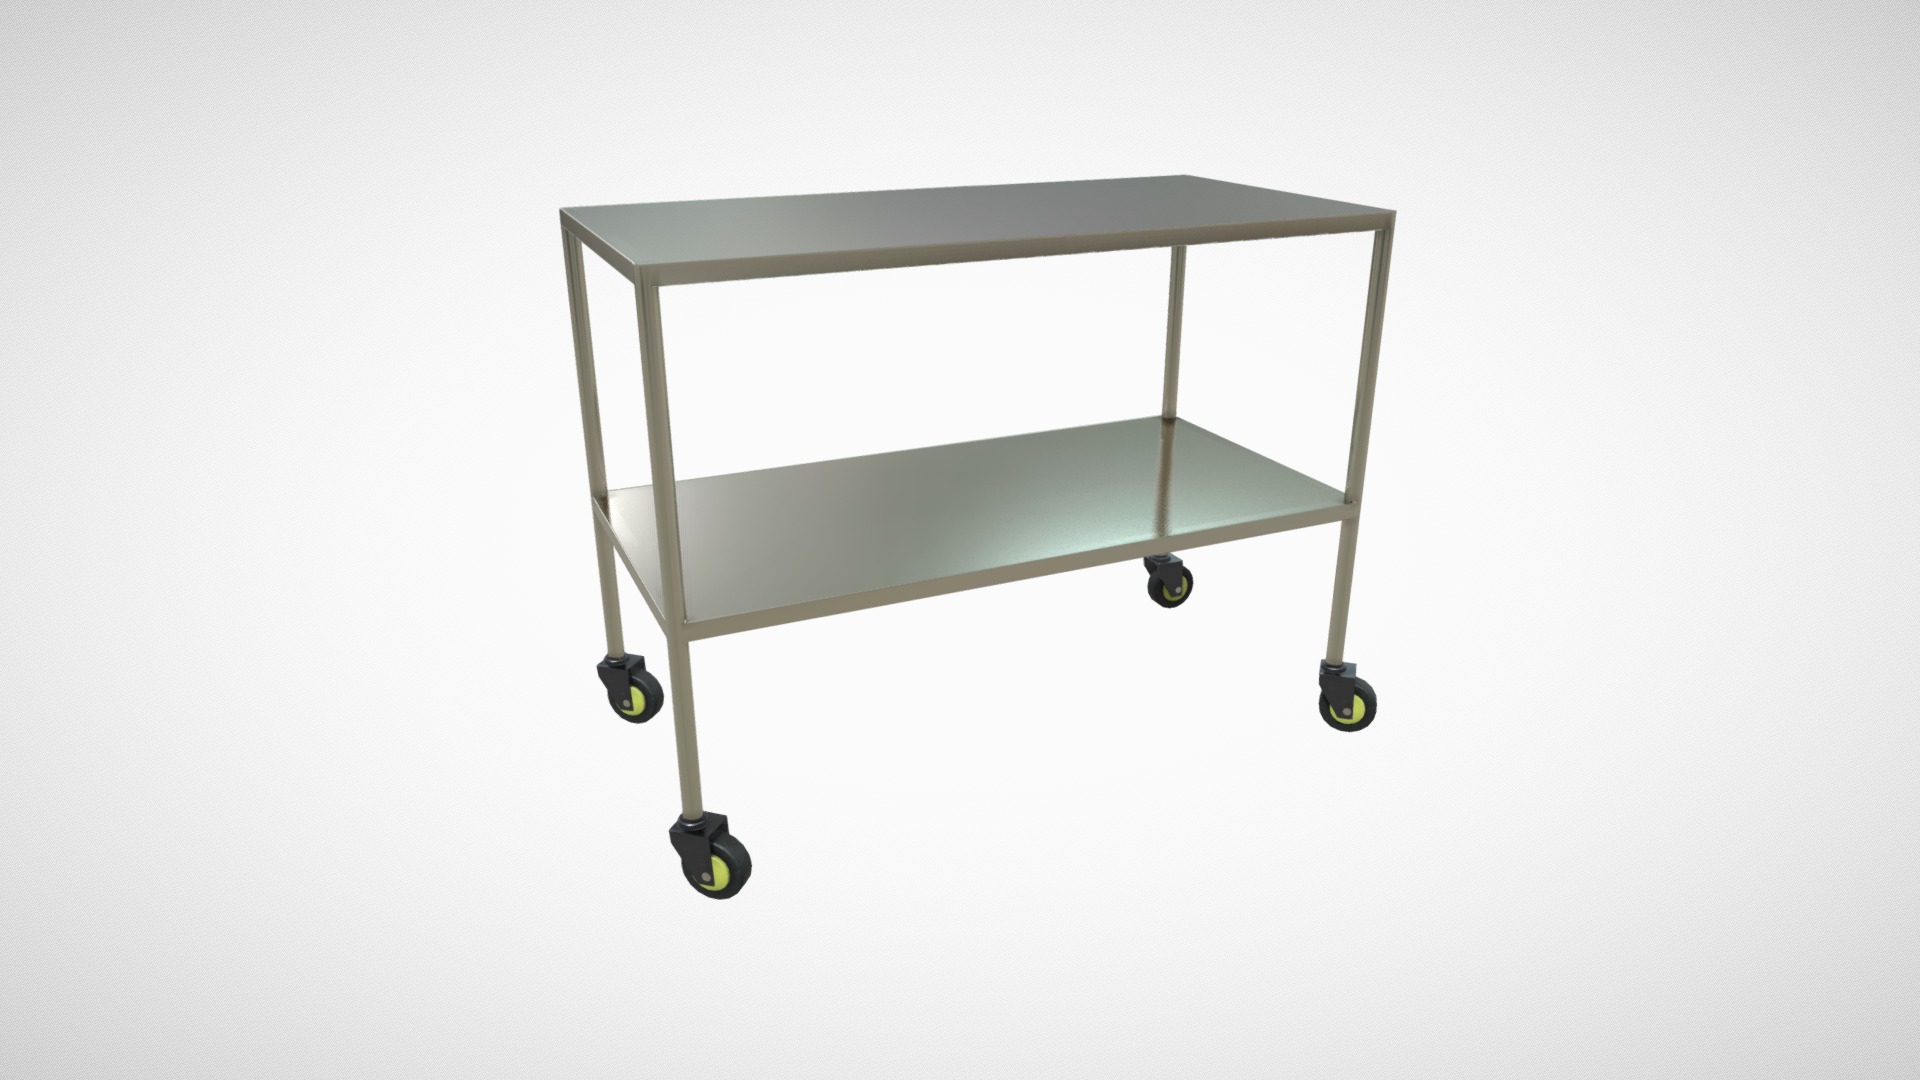 3D model Medical Trolley - This is a 3D model of the Medical Trolley. The 3D model is about a white table with a lamp shade.